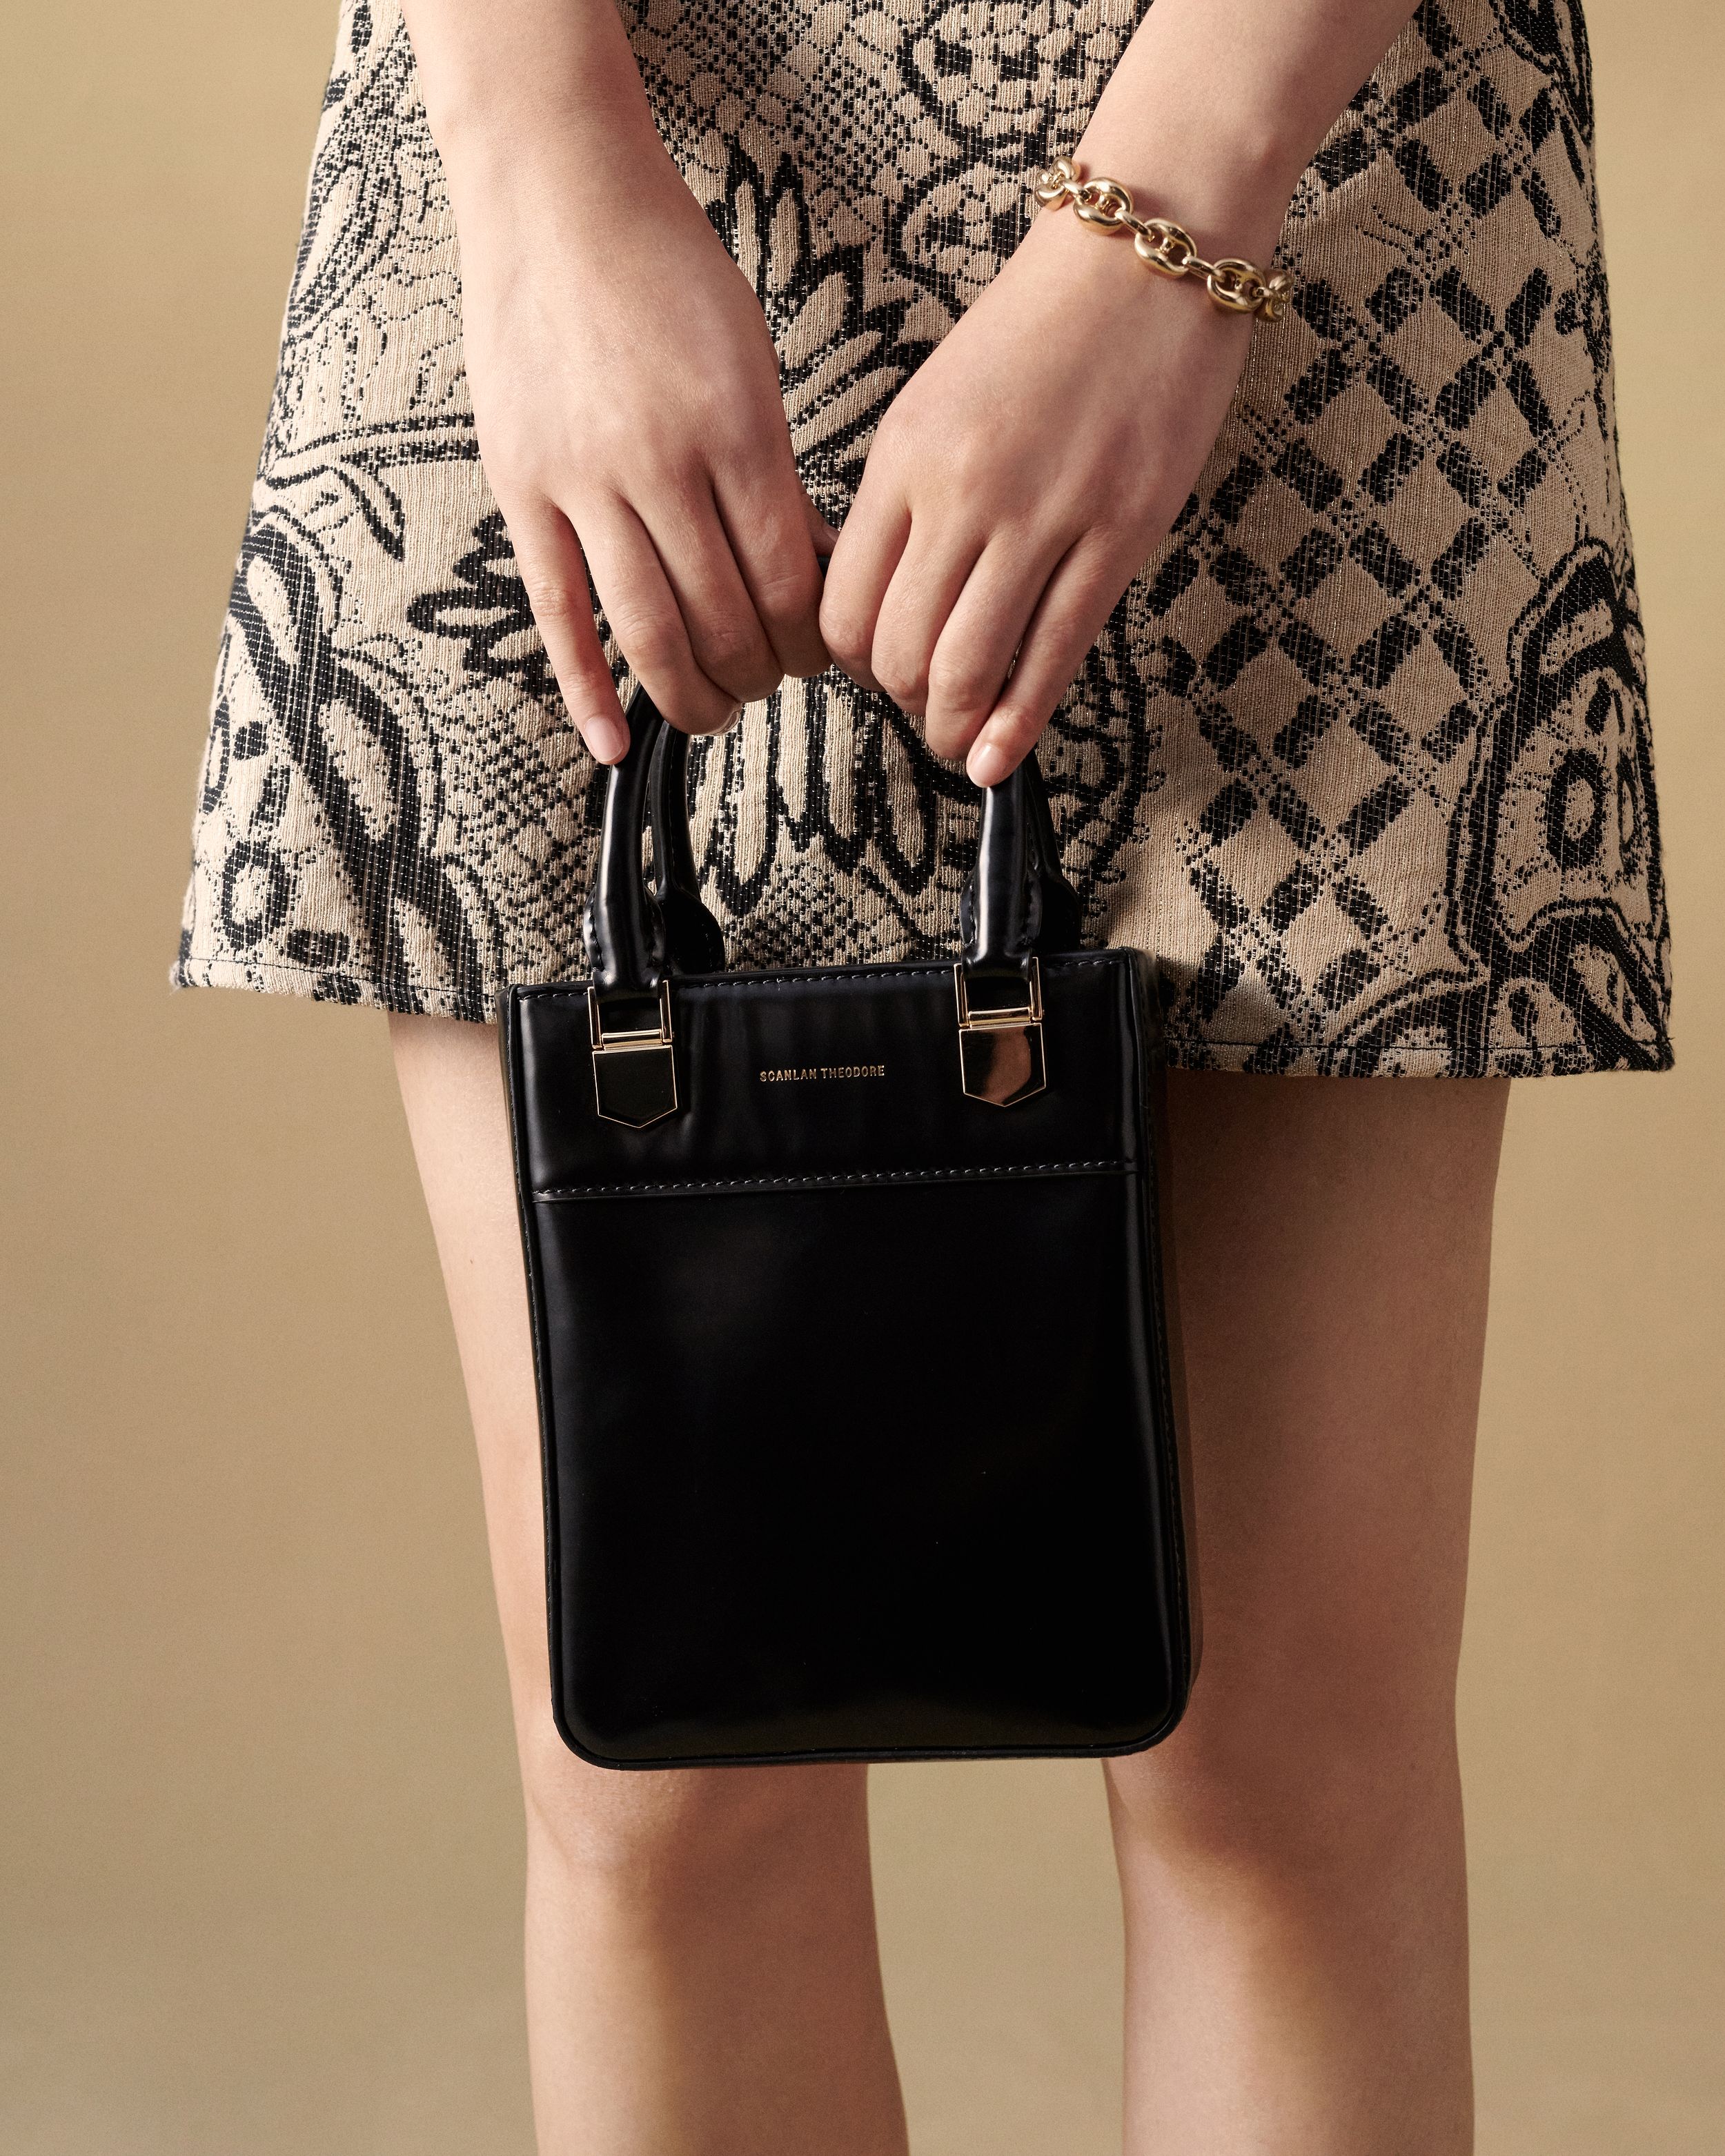 Close up shot of model holding a mini black leather bag wearing a patterned mini skirt